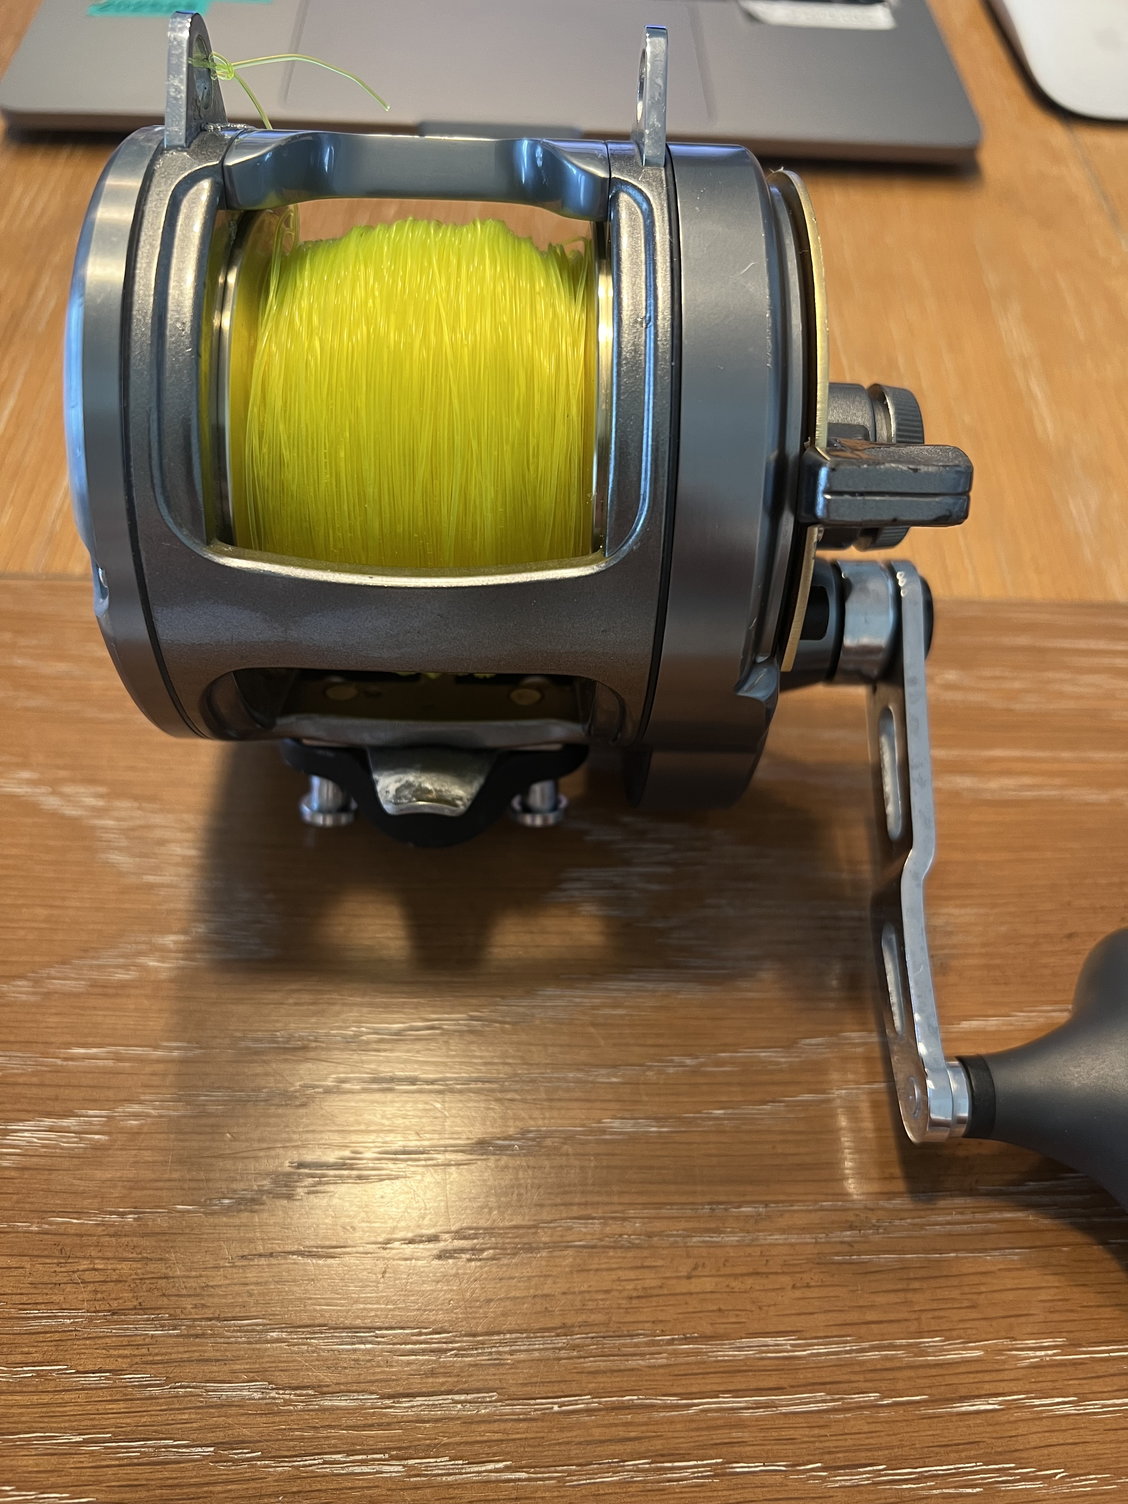 Shimano Reels For Sale - The Hull Truth - Boating and Fishing Forum